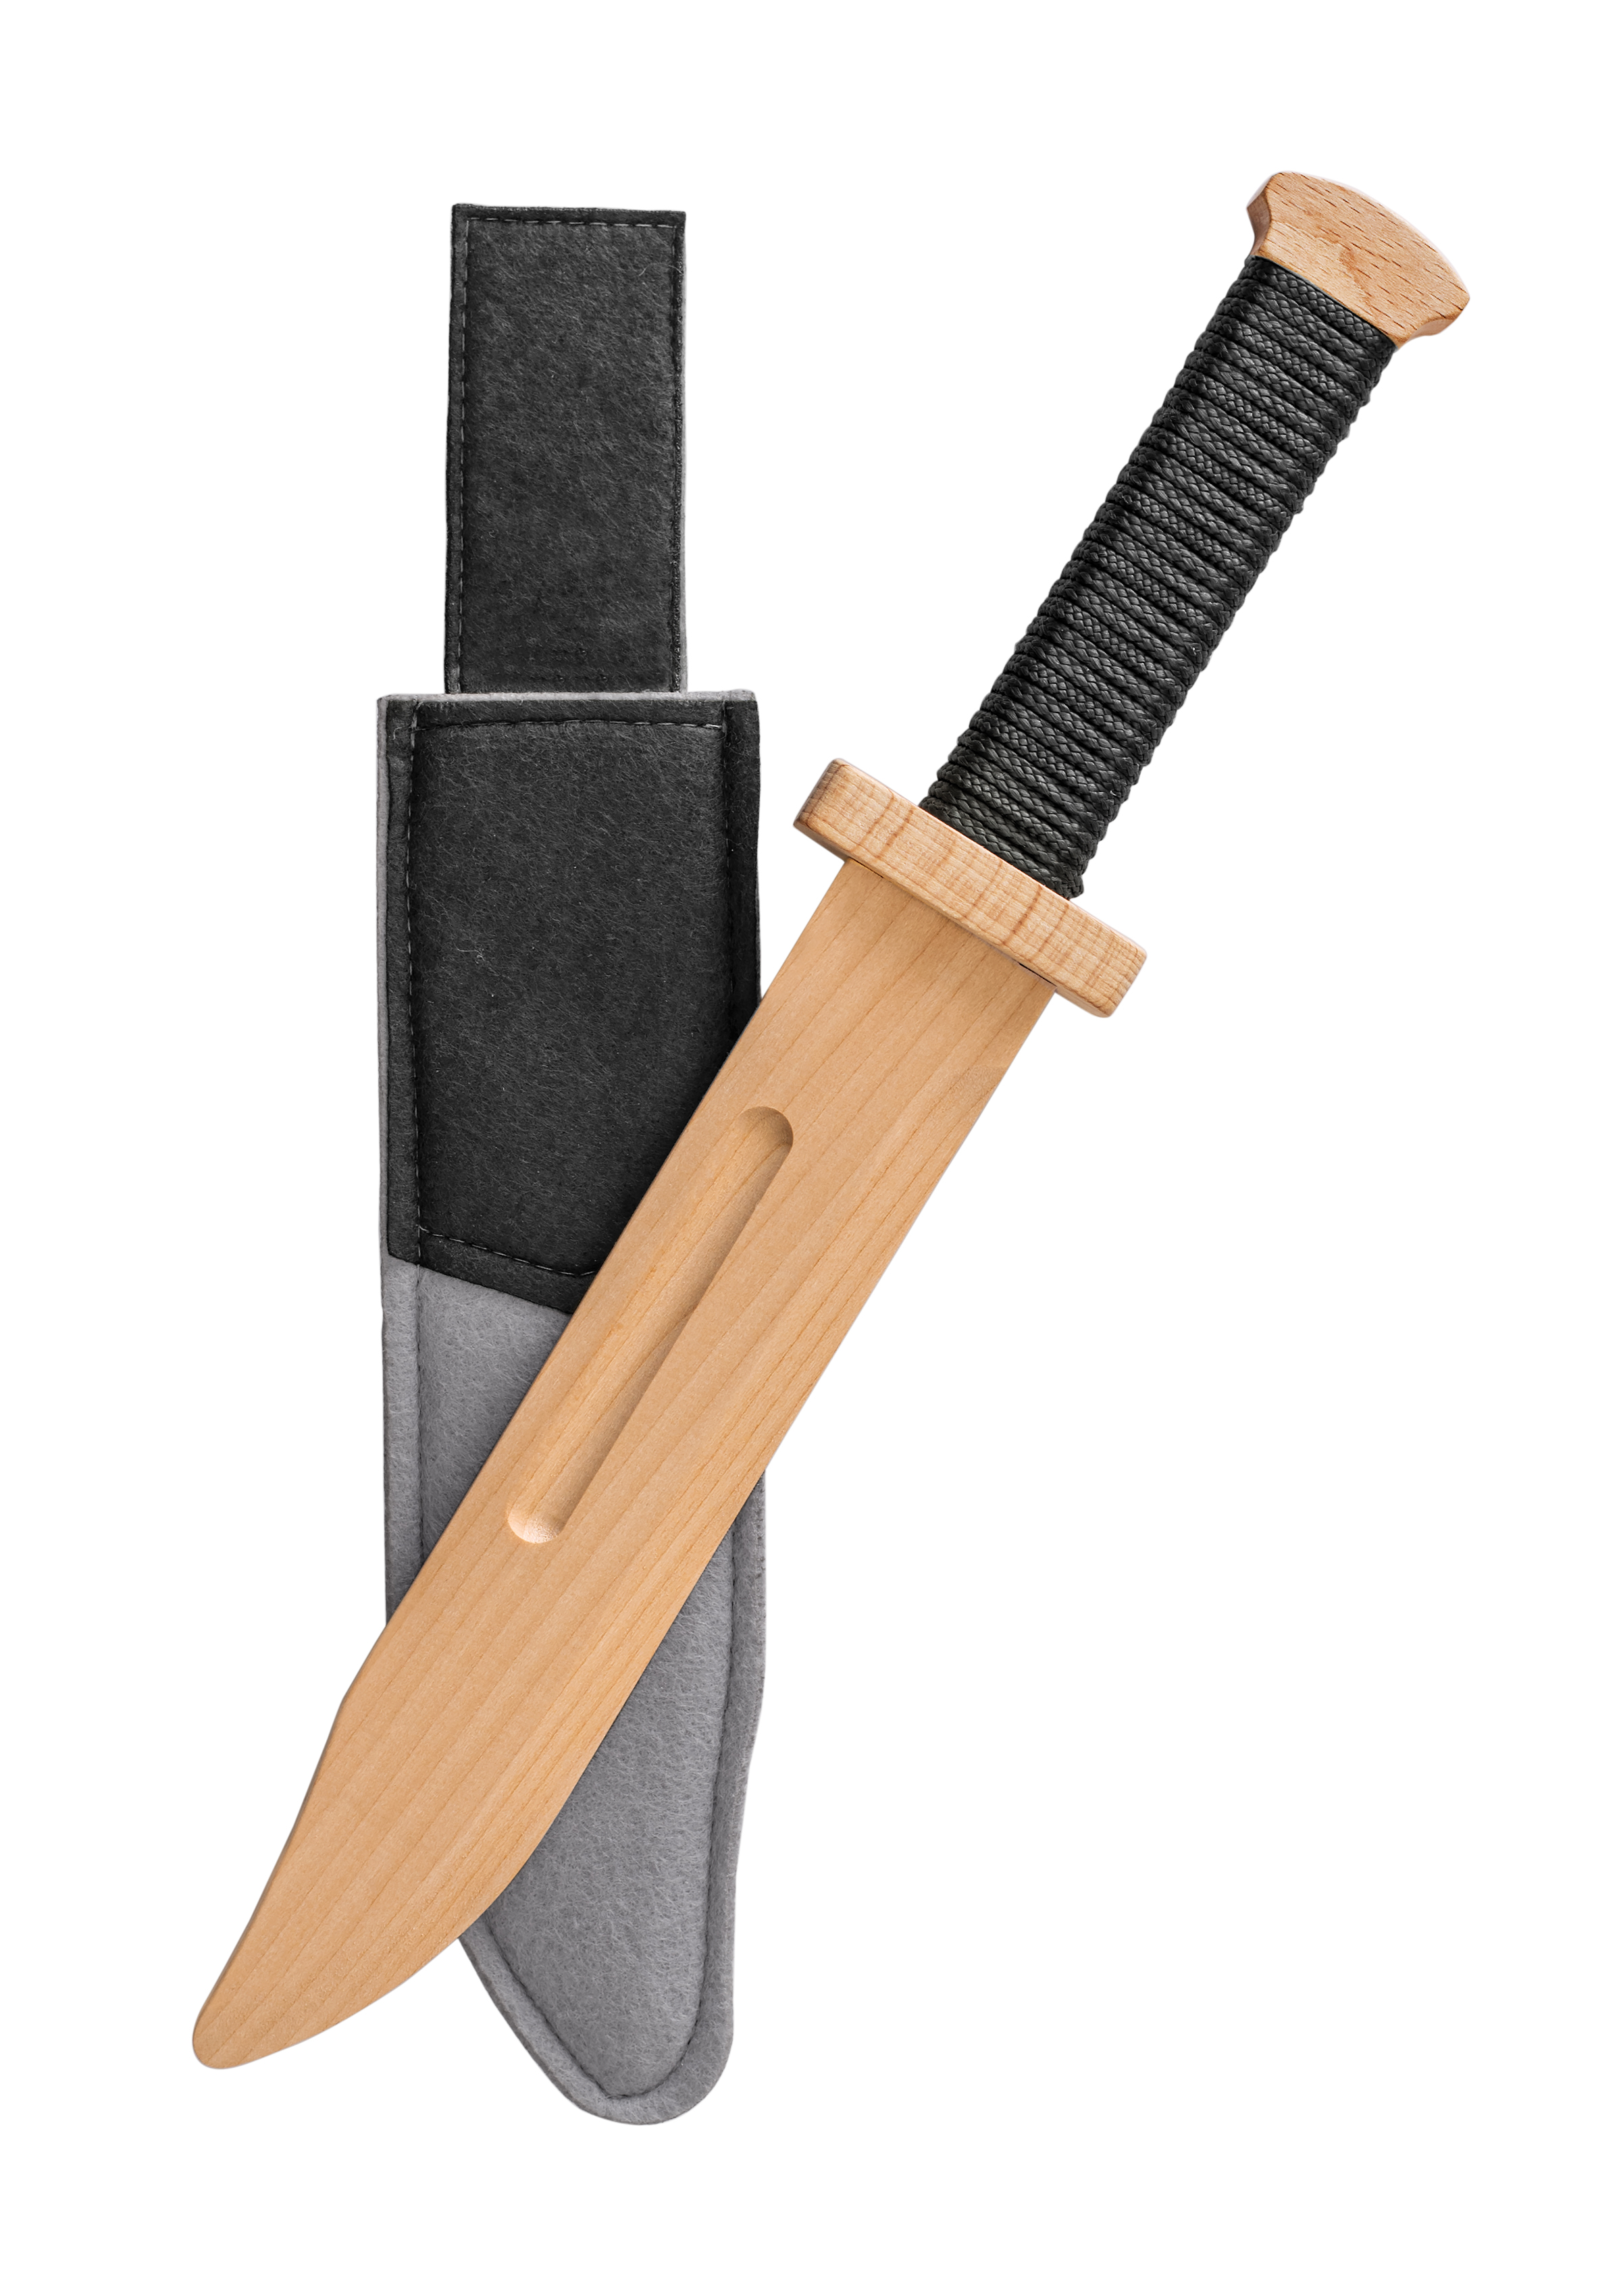 Combat knife with shell